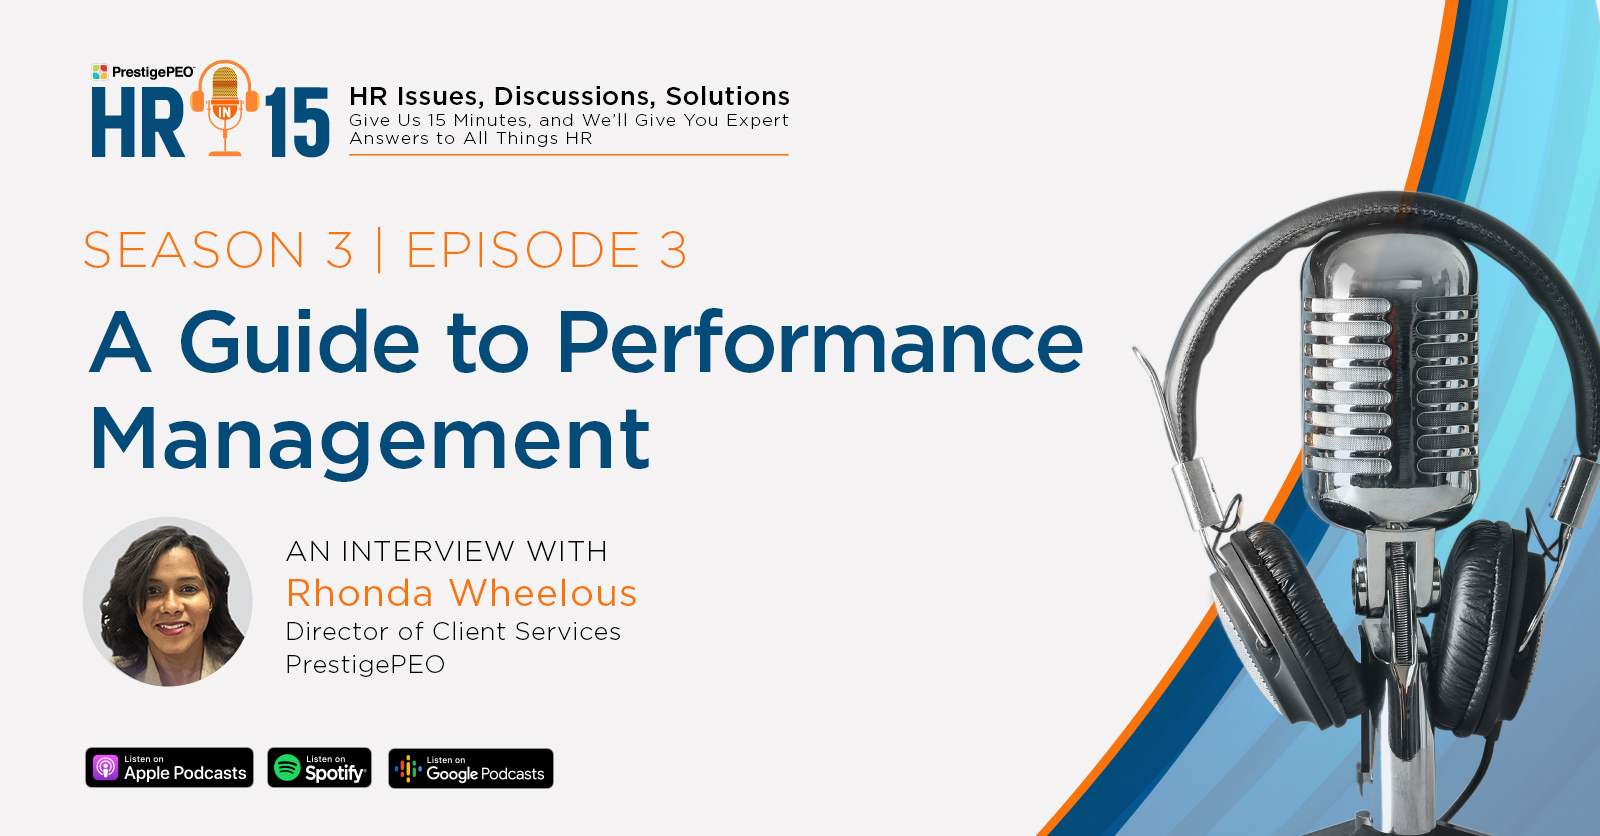 HR-in-15 Interview with Rhonda Wheelous: A guide to performance management